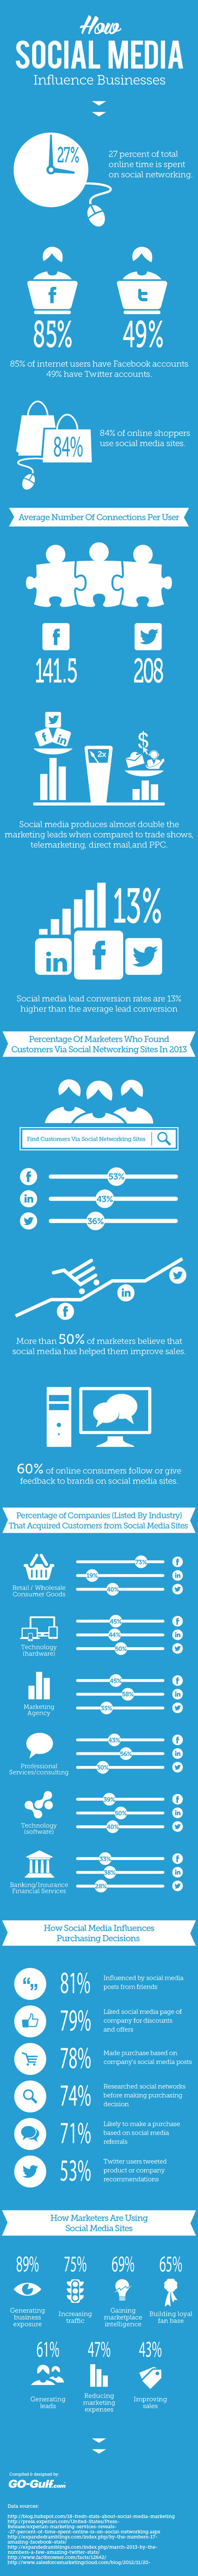 How Social Media Influence Businesses | Great #Infographic from Visual.ly | MarketingHits | Scoop.it